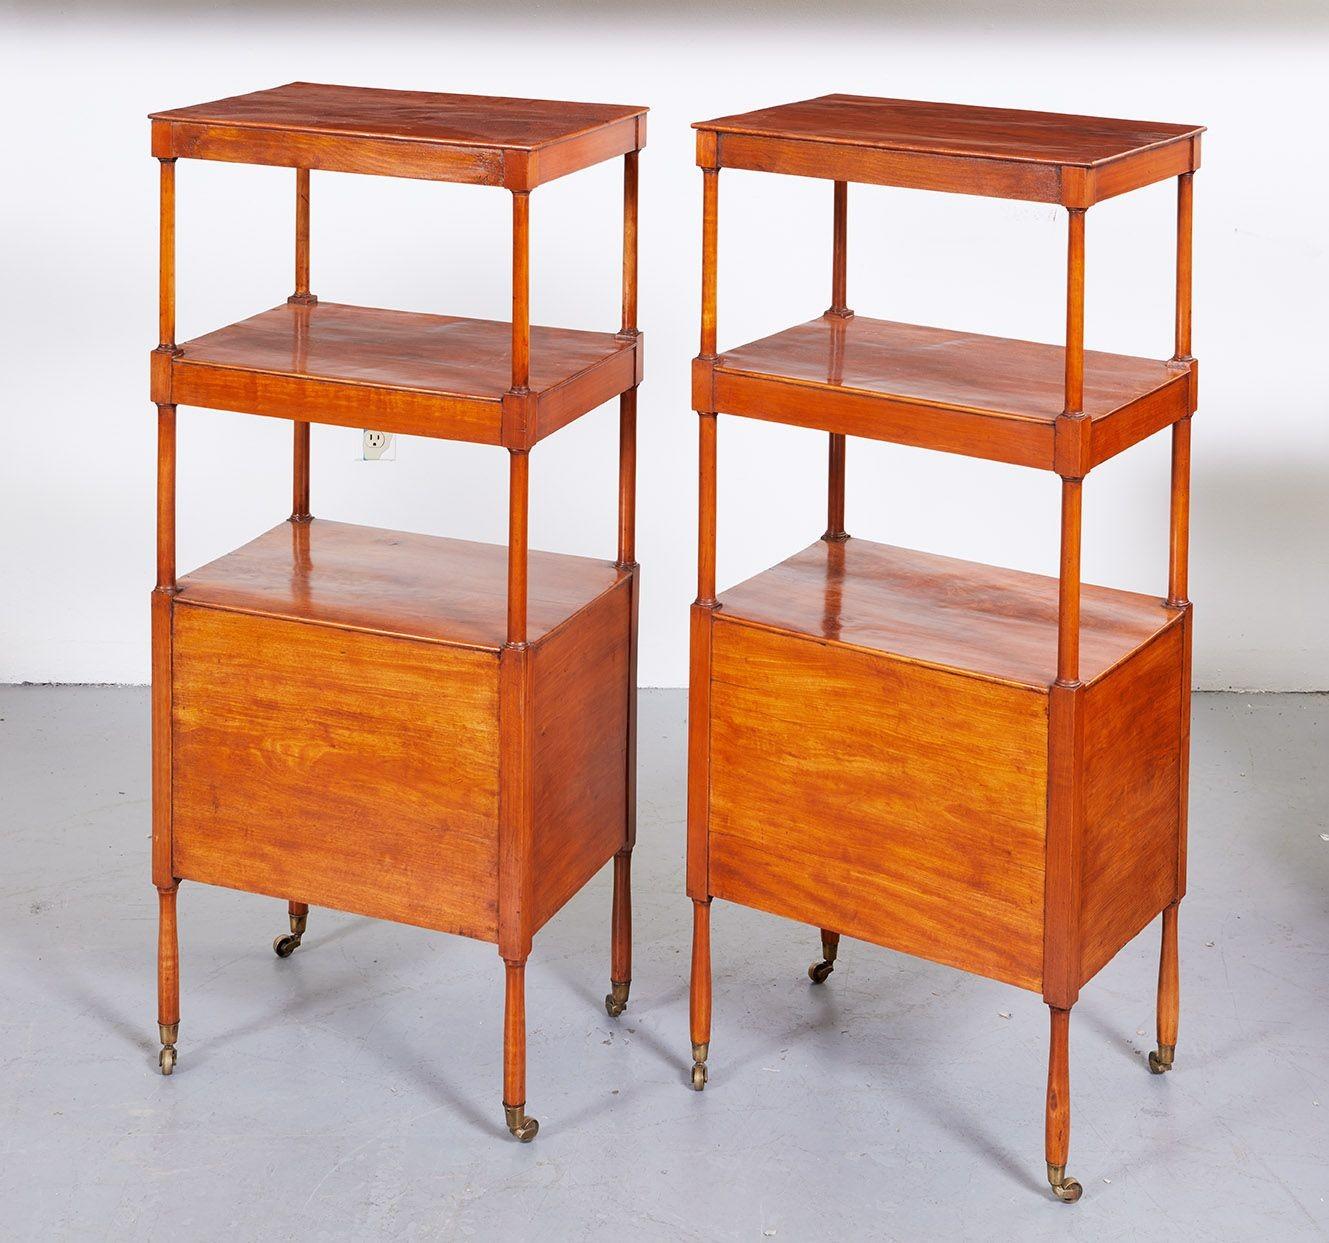 A Rare Pair of 18th c. English Satinwood Etageres For Sale 2